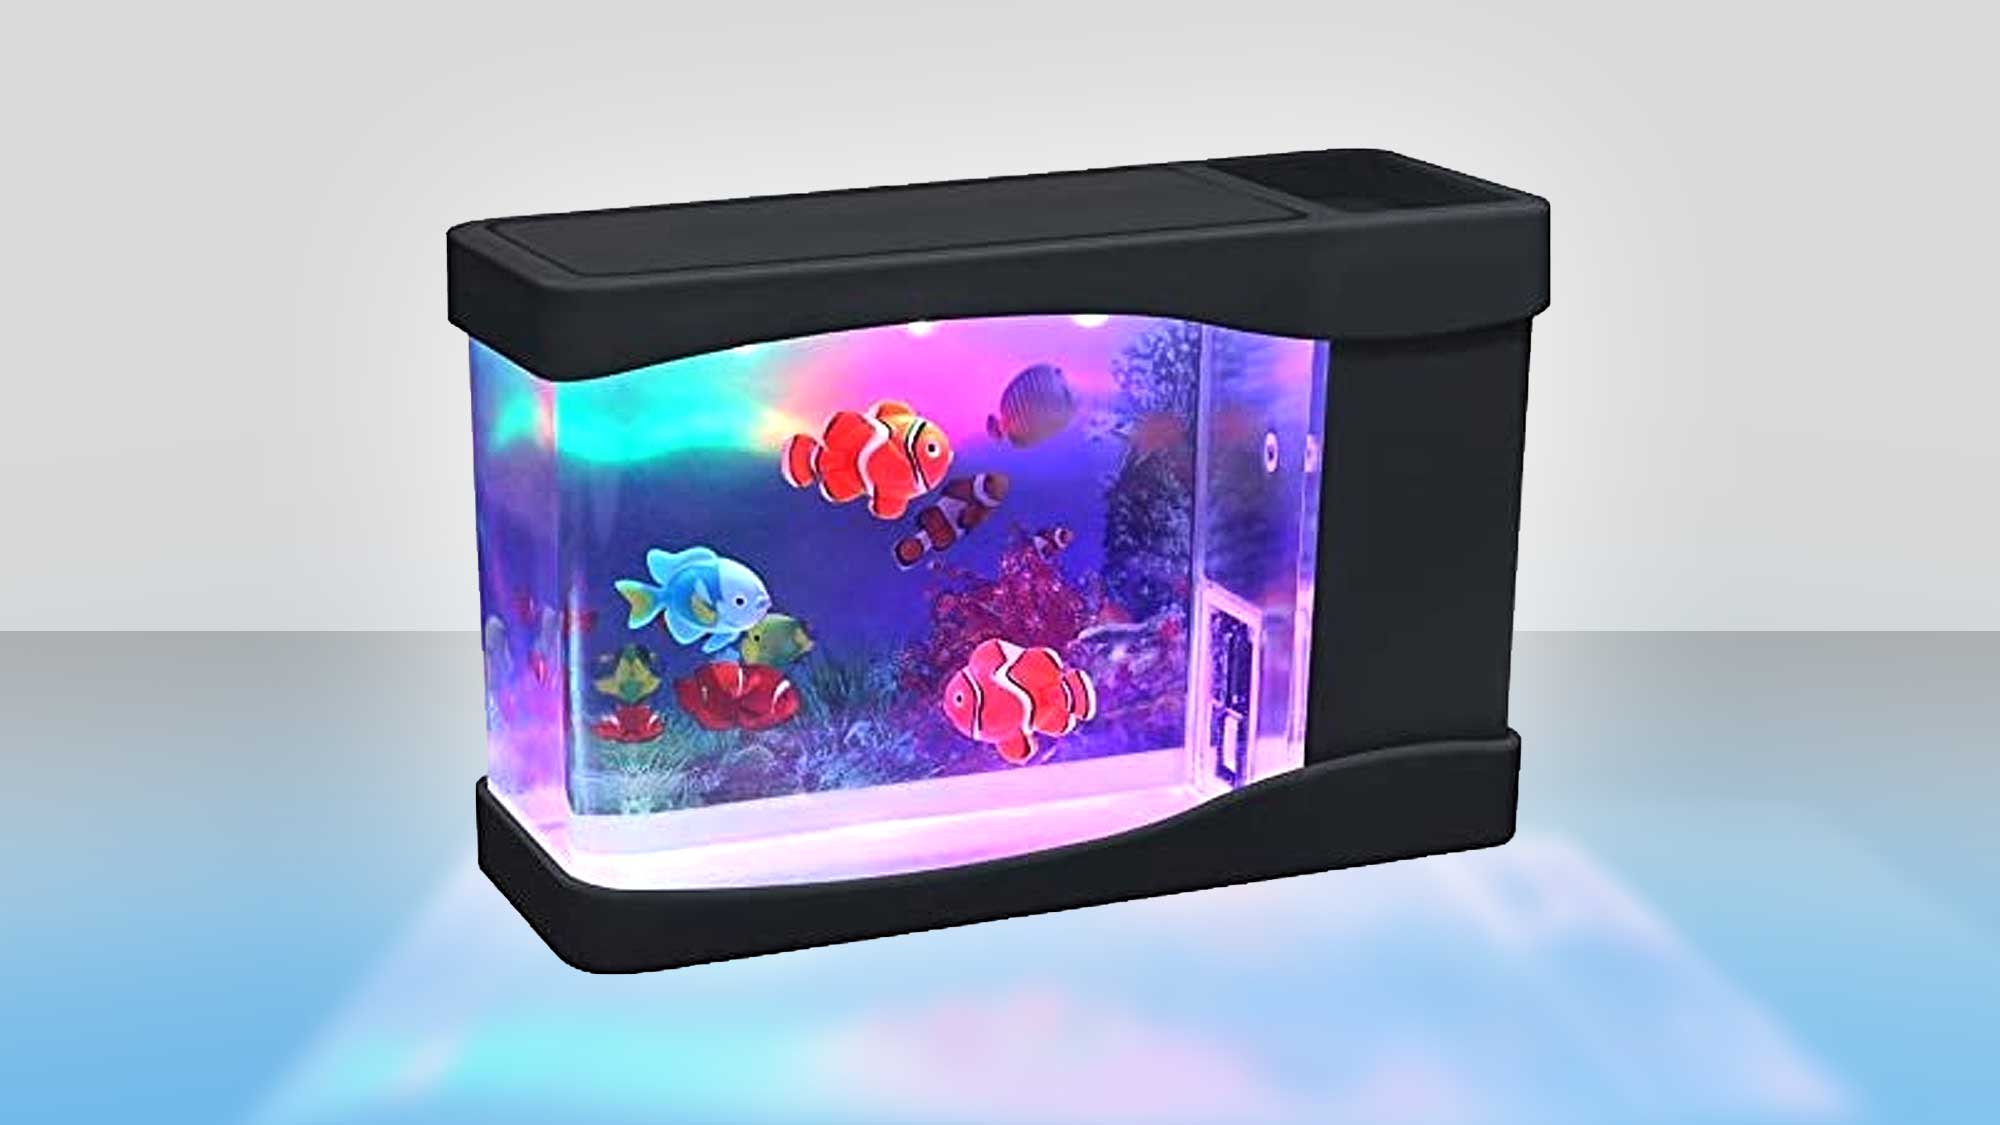 Add Life To Your Cubicle With This USB Aquarium Desk Toy